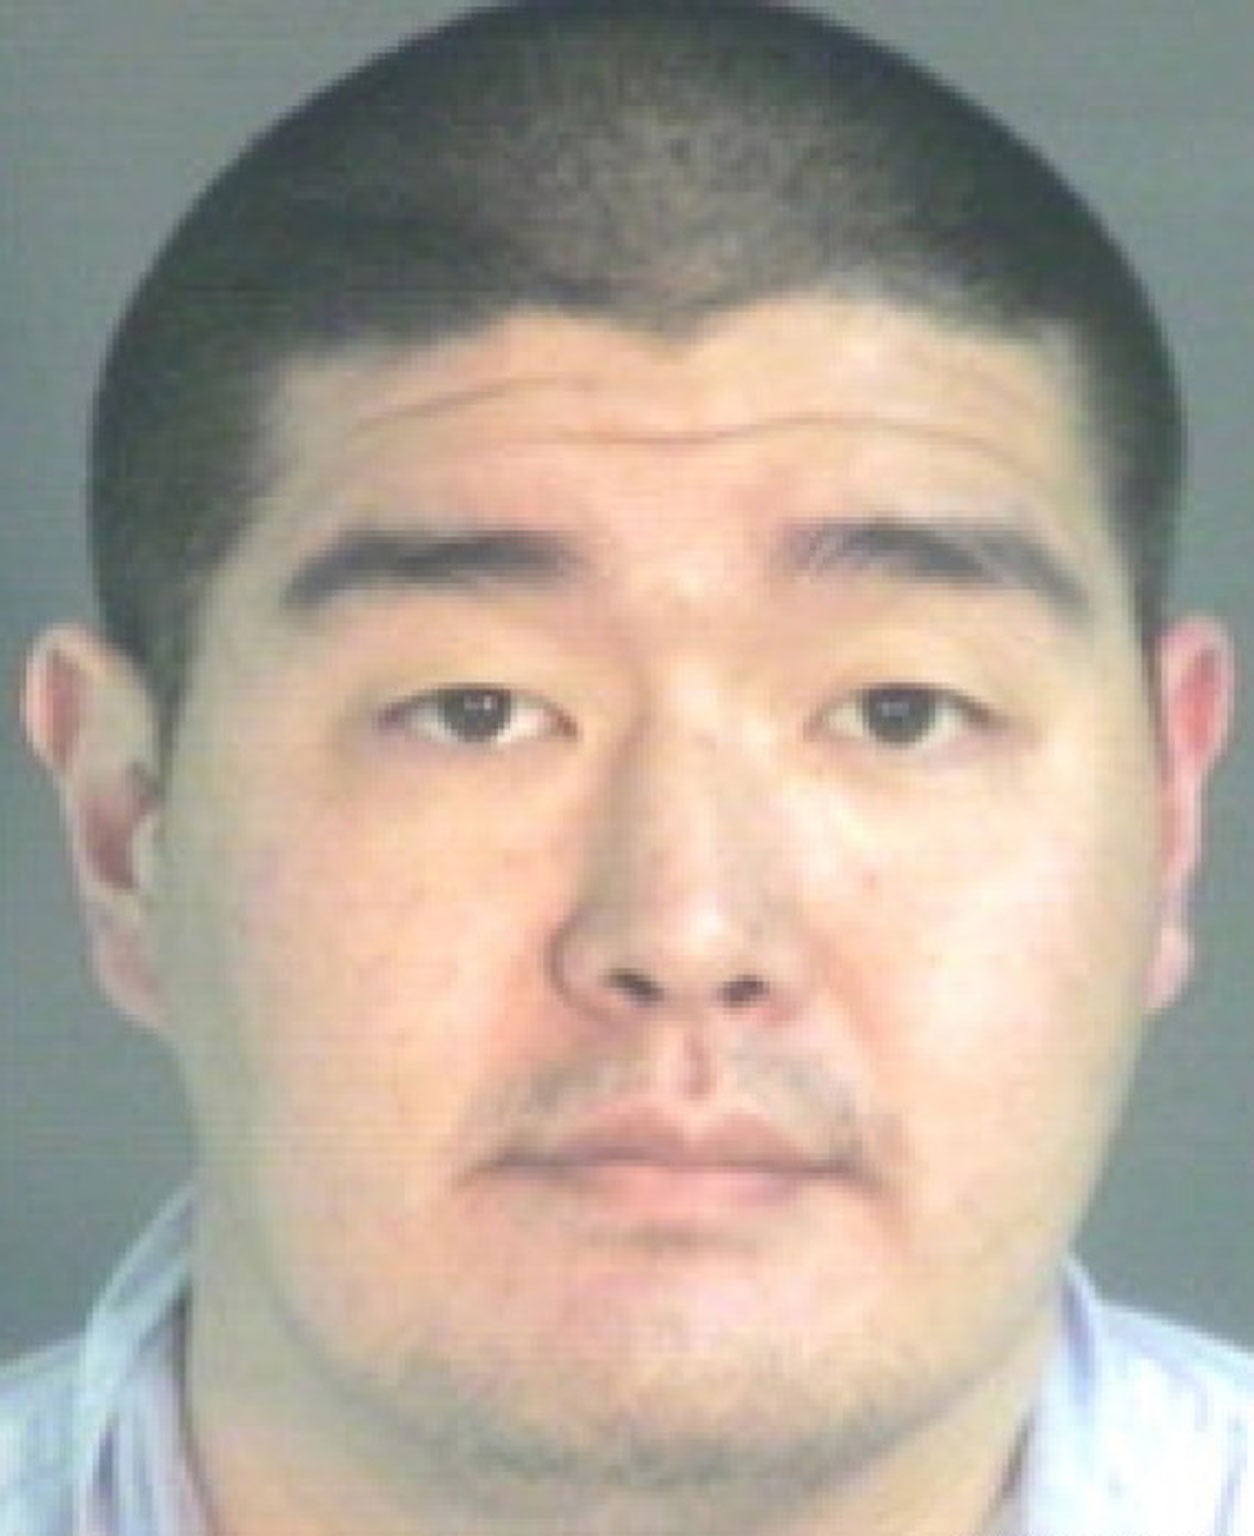 Douglas Yim (pictured) who now faces 126 years to life in prison when sentenced in November, killed 25-year-old Dzuy Duhn Phan in April 2011 after a night of drinking alcohol, smoking marijuana and snorting cocaine.